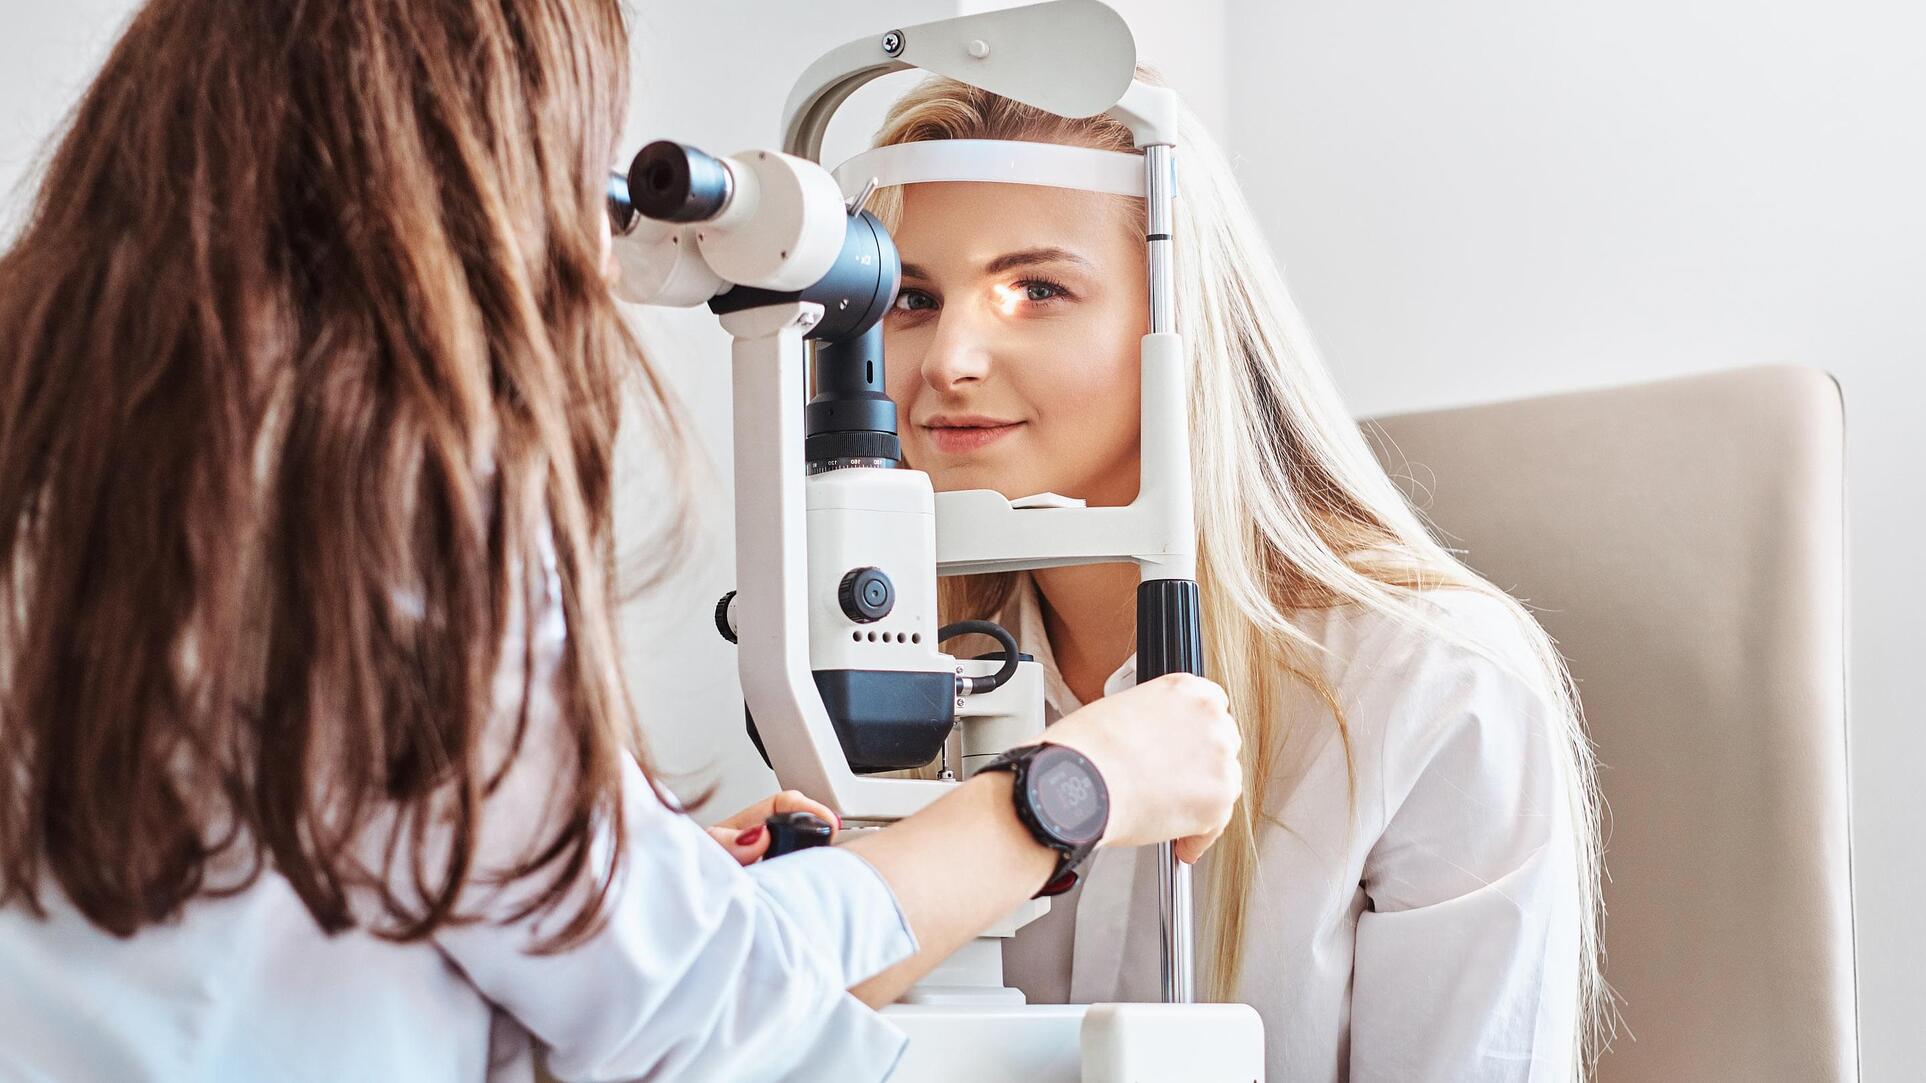 A great starting point to begin improving your eye health is to schedule an appointment with your eye doctor.